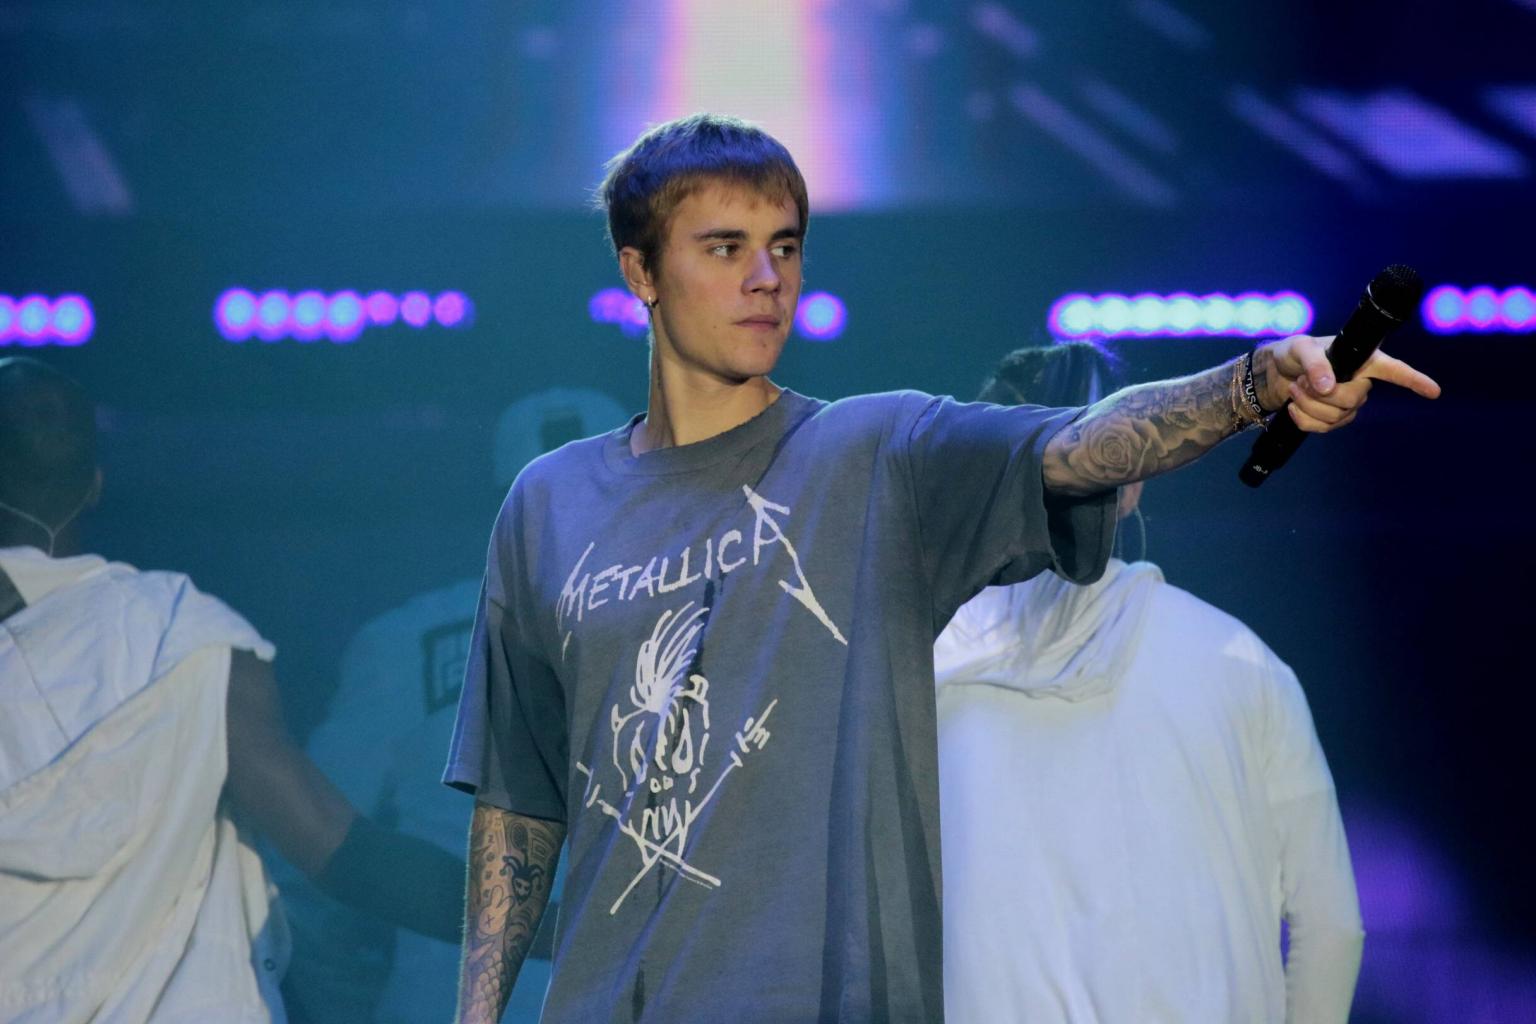 Justin Bieber Breaks Into Tears While Performing        Purpose      '  During A Show In Germany